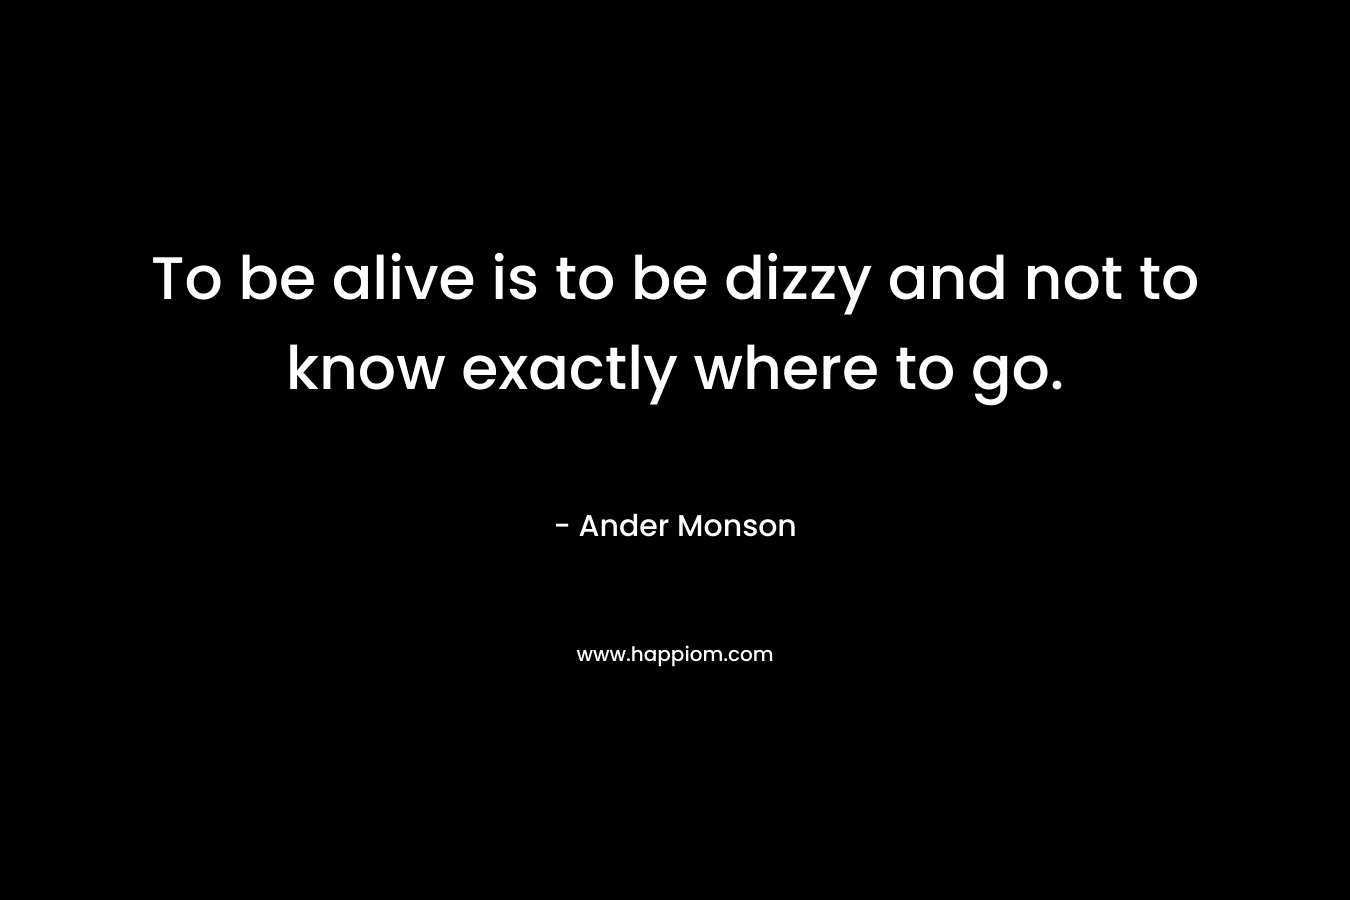 To be alive is to be dizzy and not to know exactly where to go.